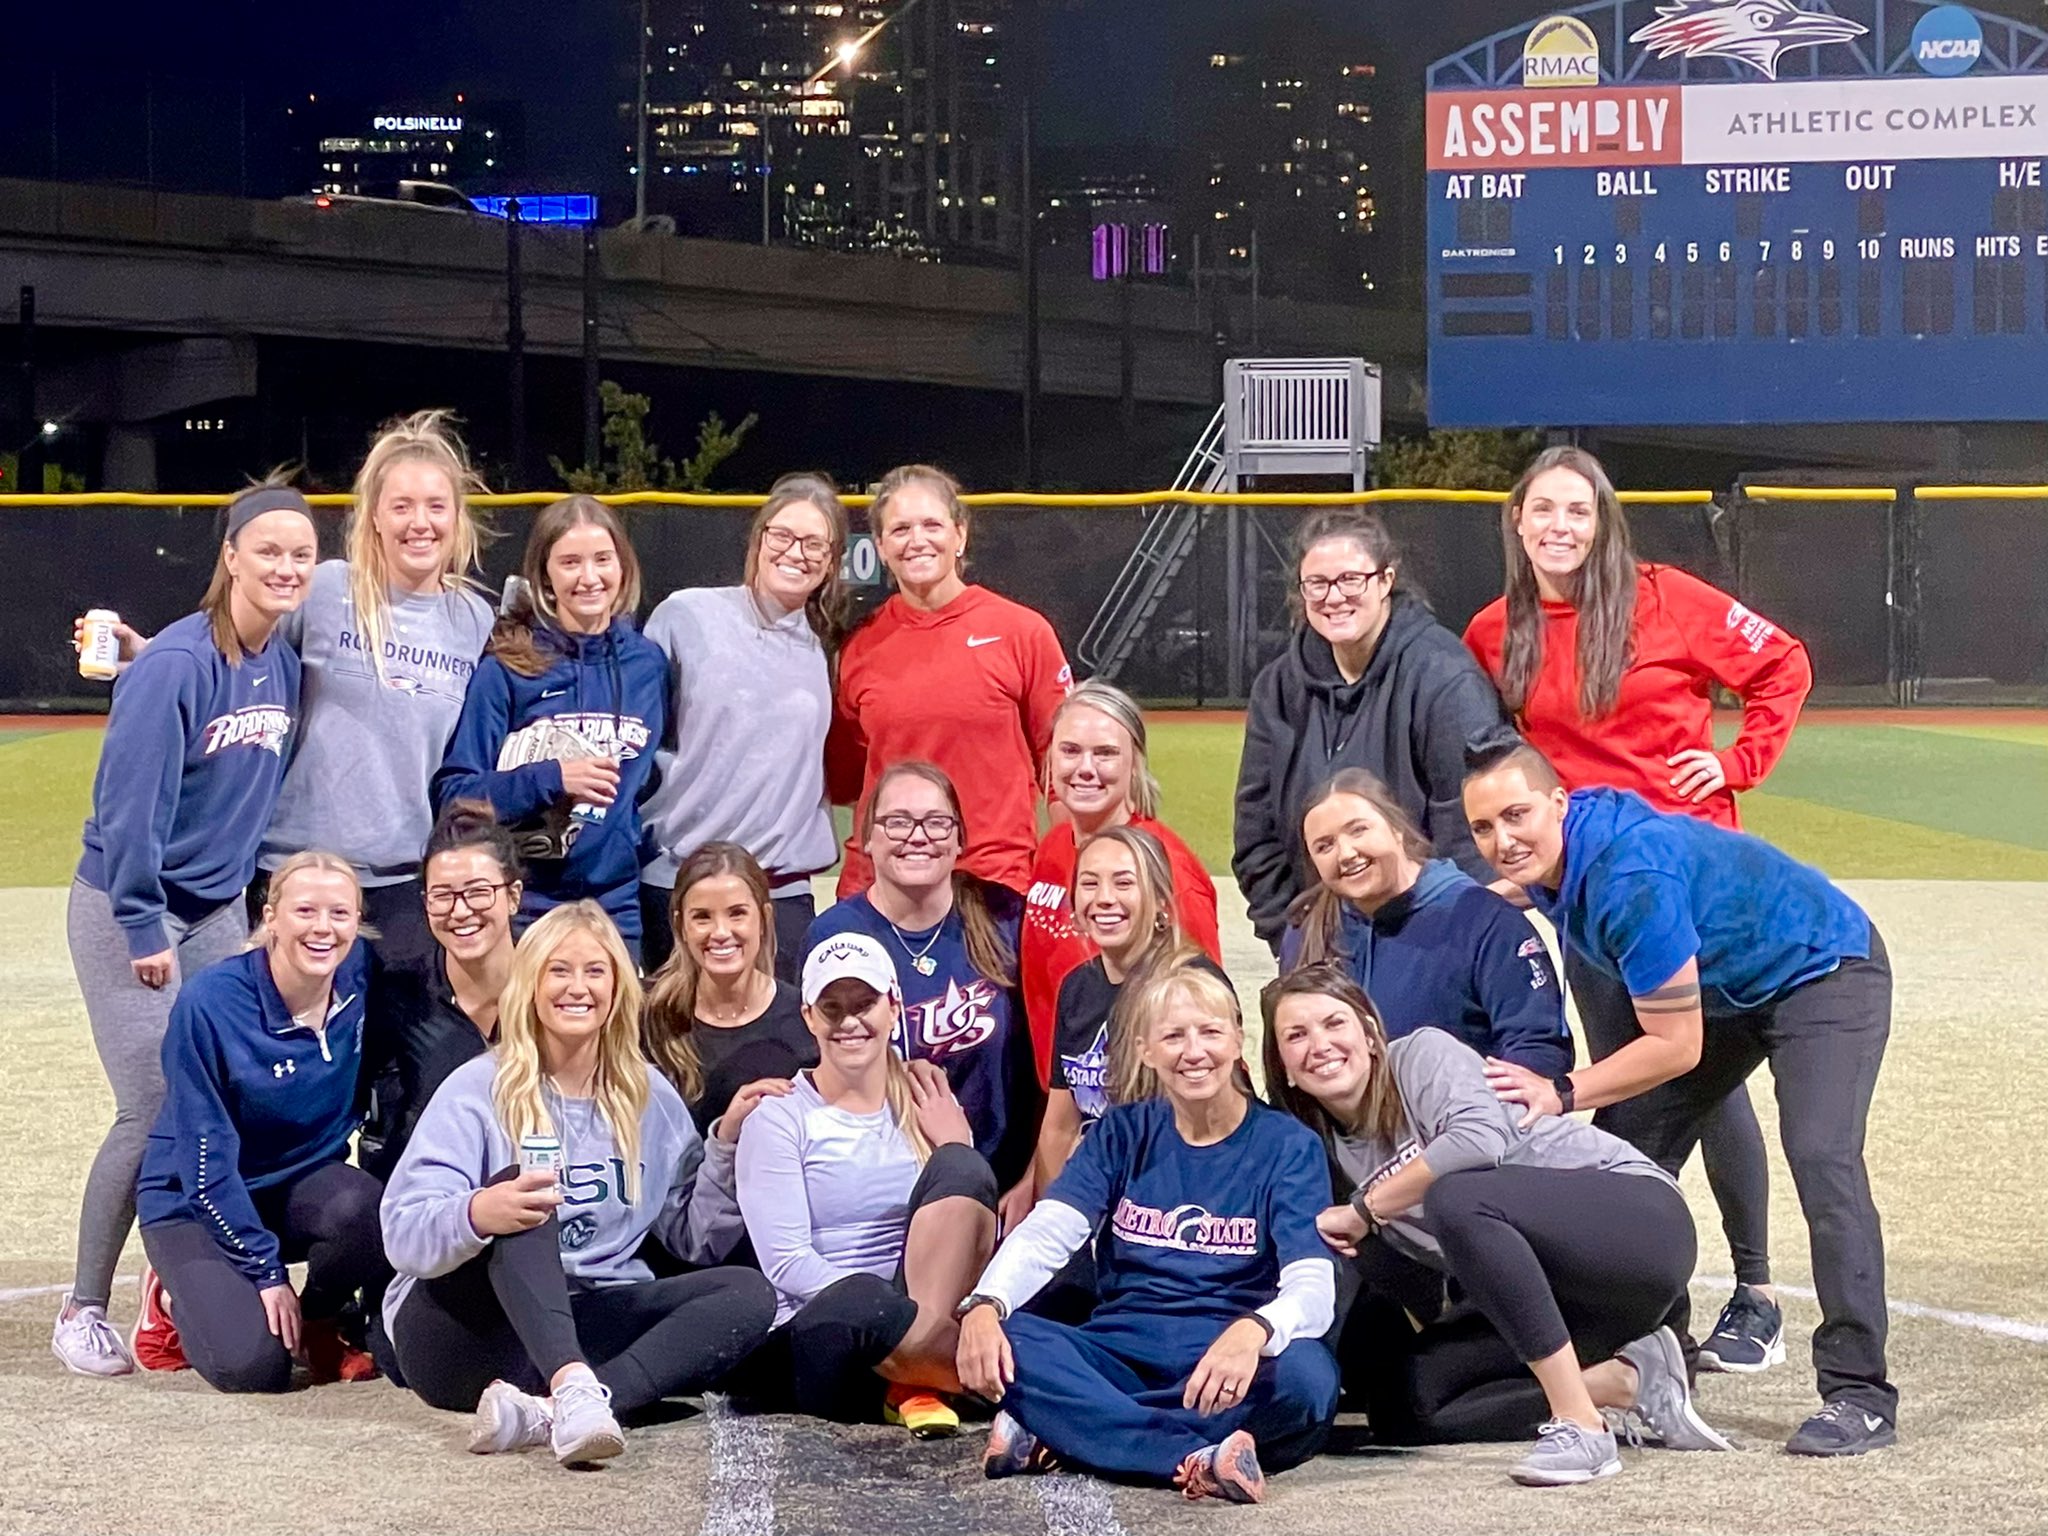 Msu Denver Softball Thank You To All Of Our Alums Who Came Out Last Night It S Always A Fun Time To Welcome Back Our Roadies To The Field Roadiessb Getrowdy